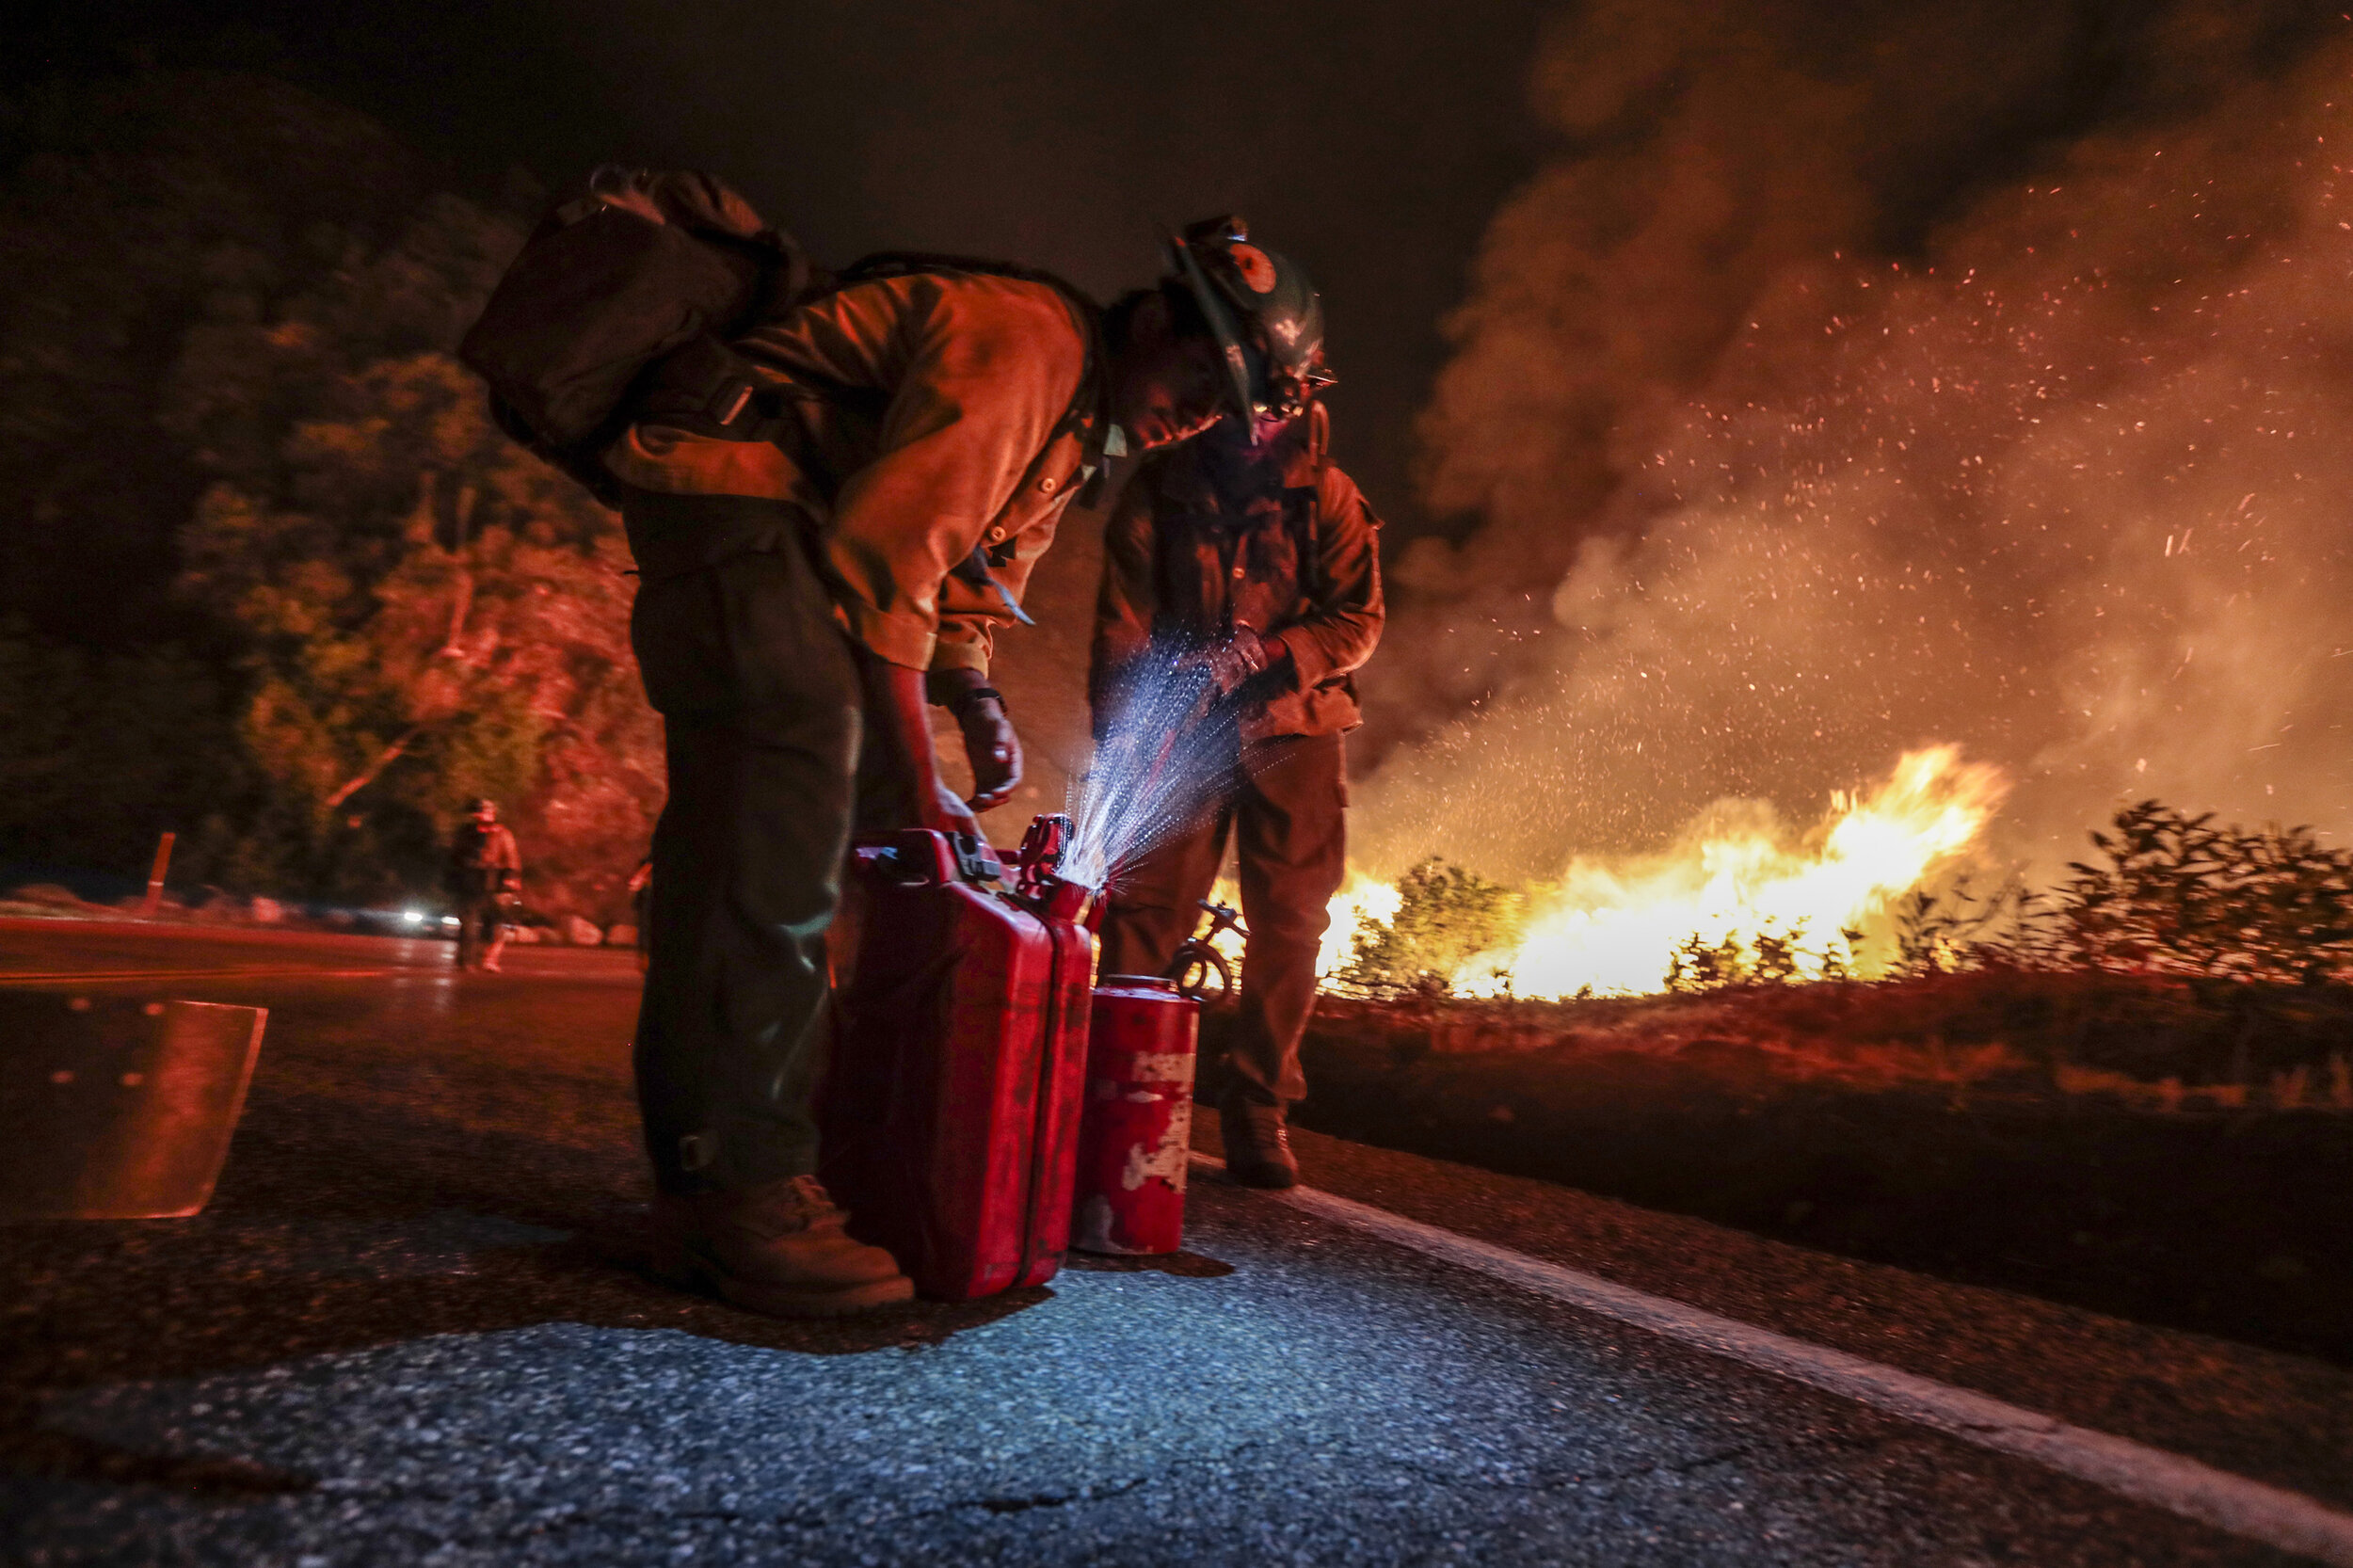  Firefighter Juan Quiroga handles a gas can as members of the Blue Ridge, Arizona hot shot crew prepare to execute a burn out operation on the Bobcat Fire.  A combination of dry brush, steep terrain and high winds, the fire burned for nearly four mon